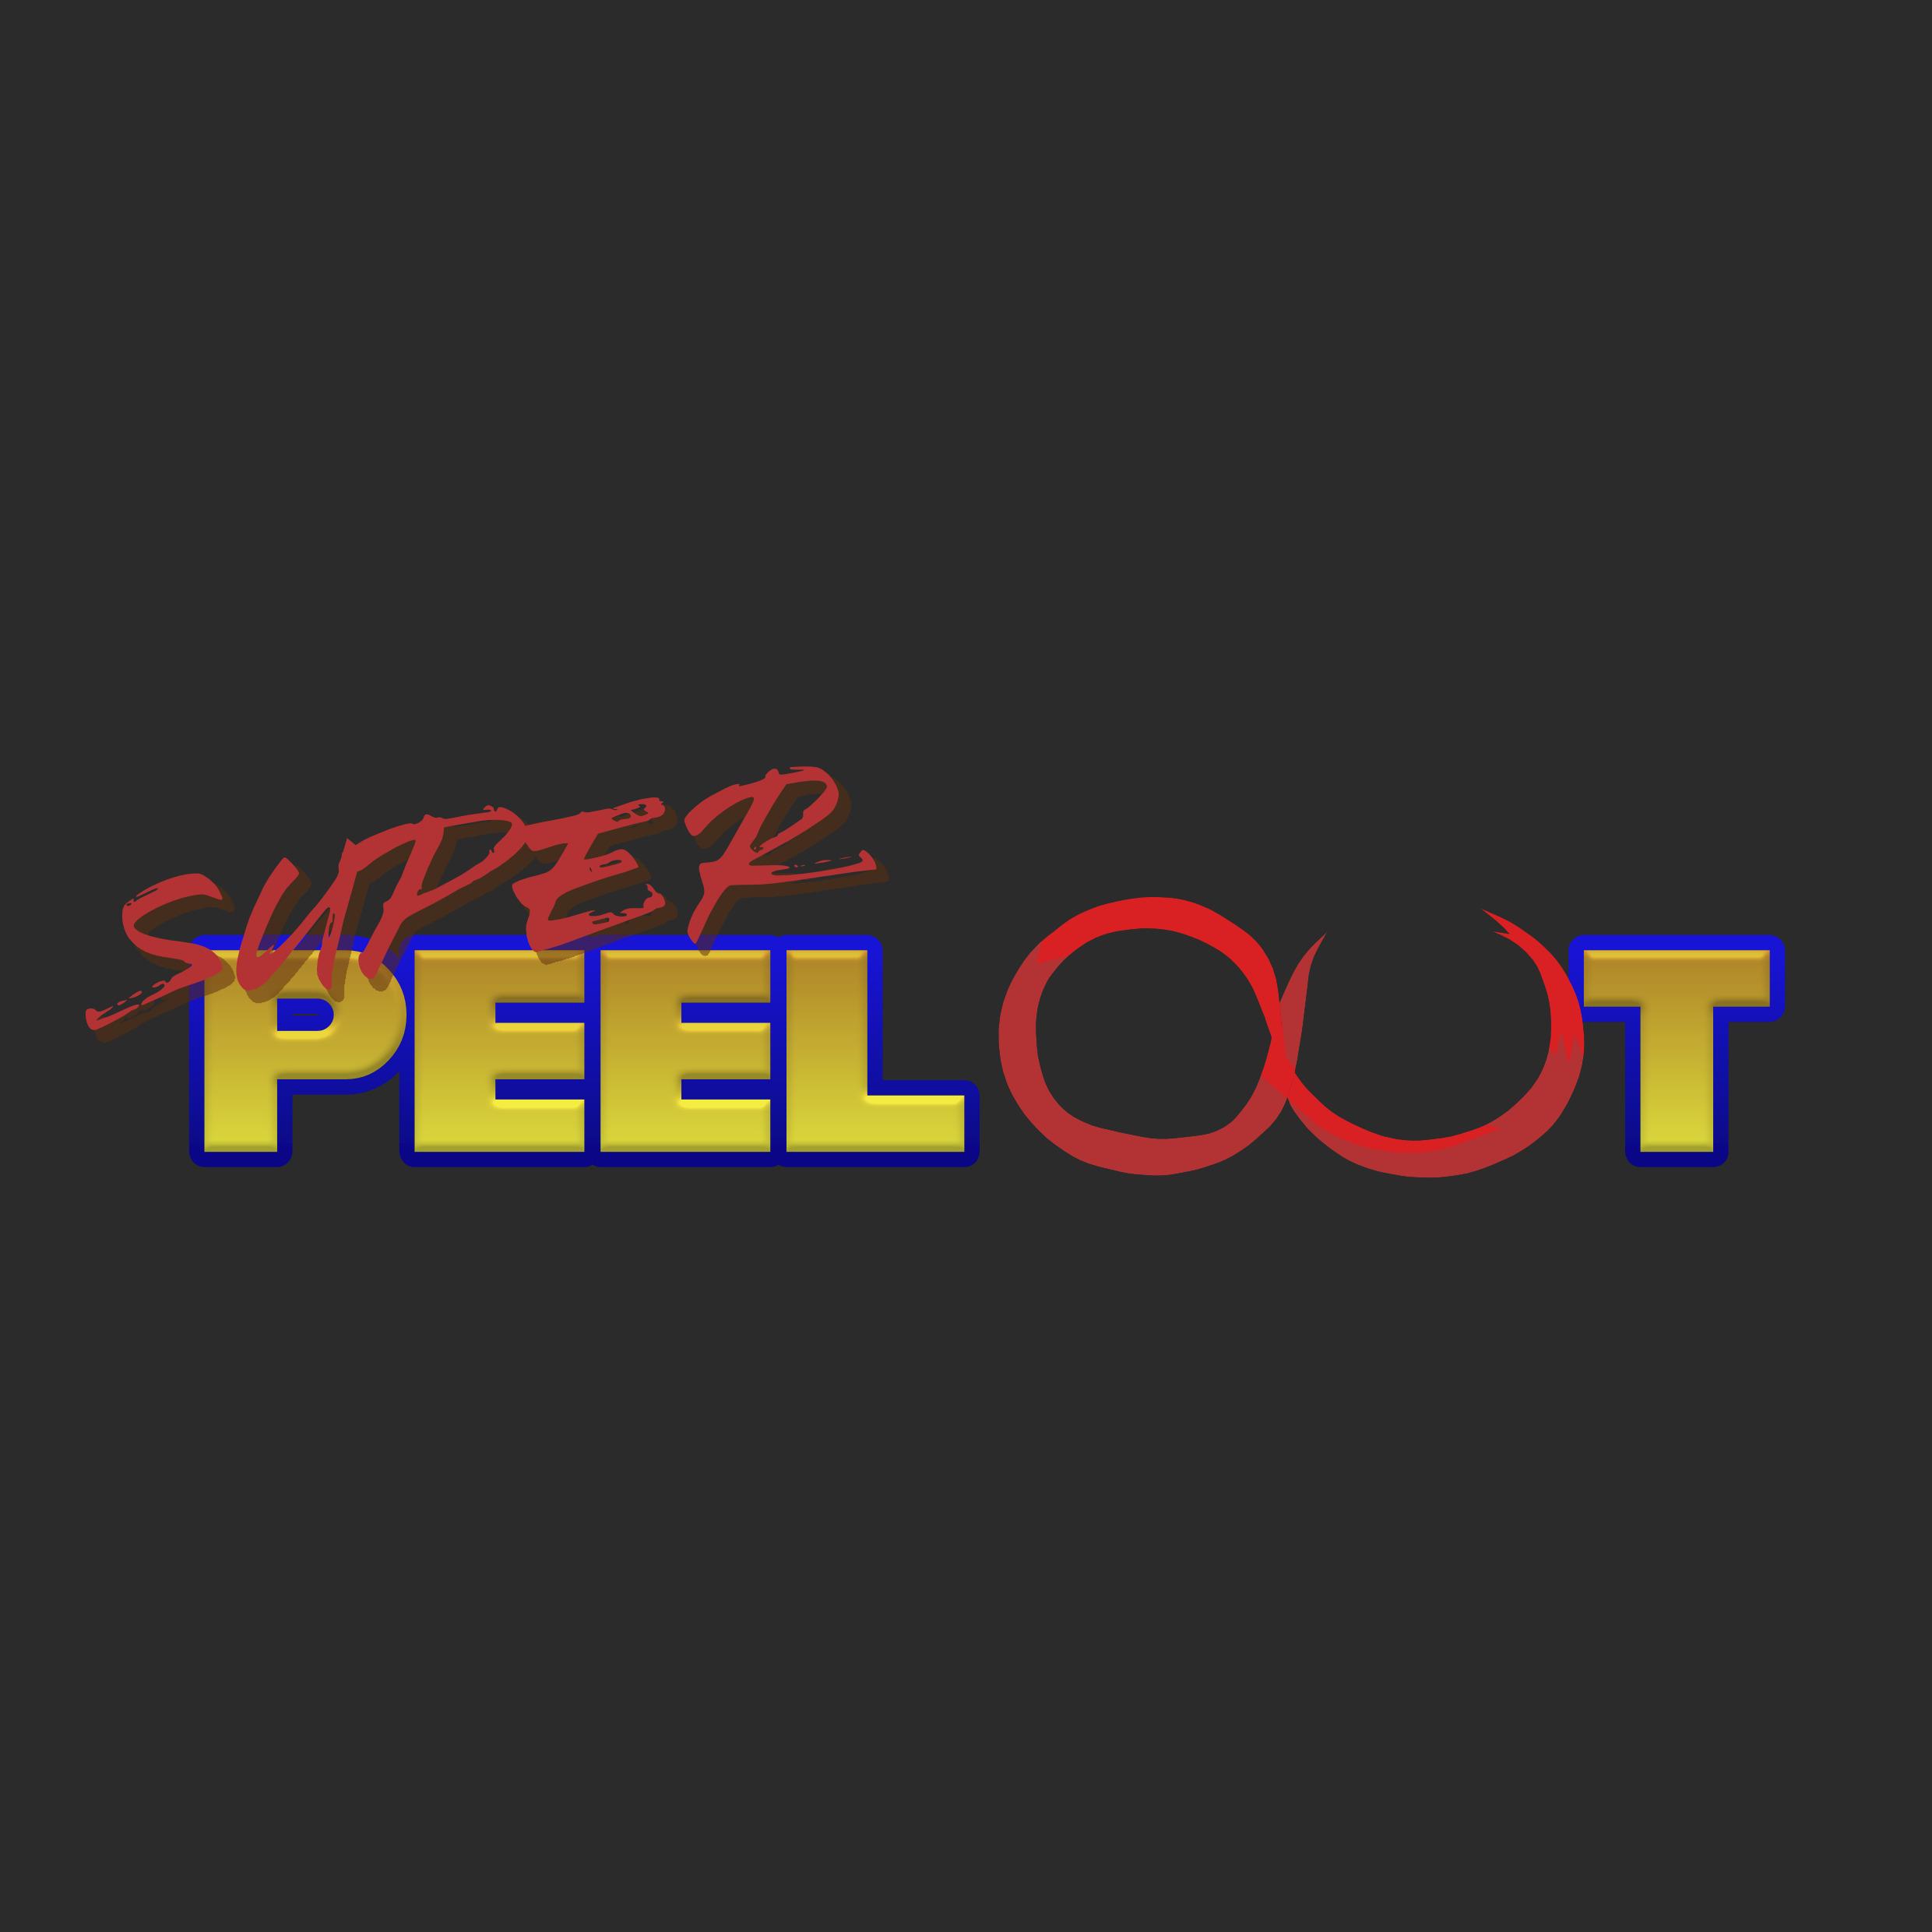 Super Peel Out